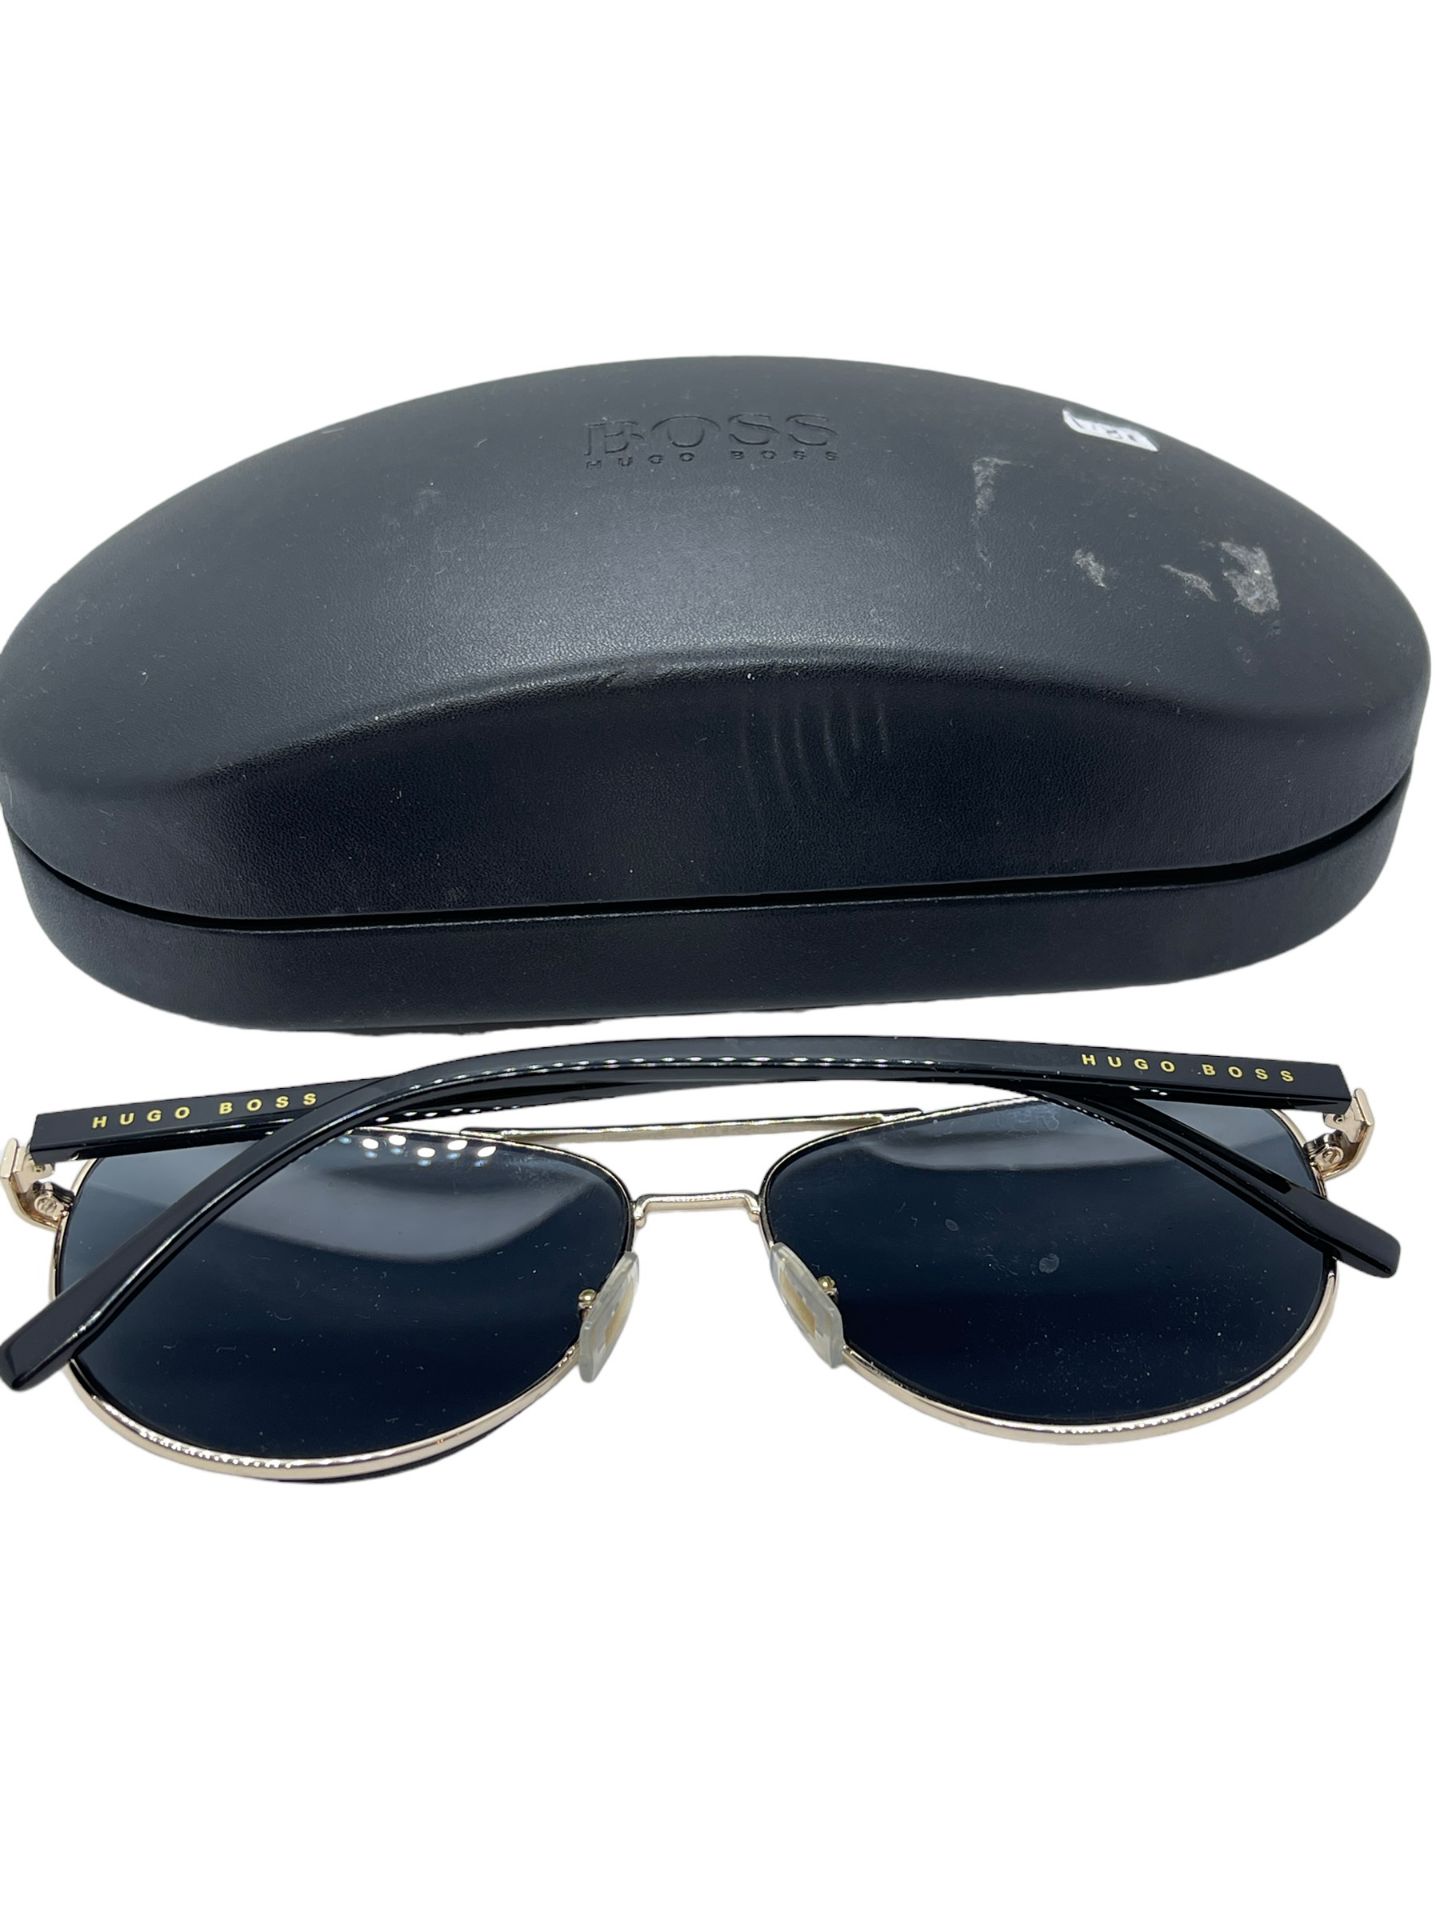 Hugo Boss Sunglasses gold plated aviators with case surplus stock xdemo - Image 3 of 6